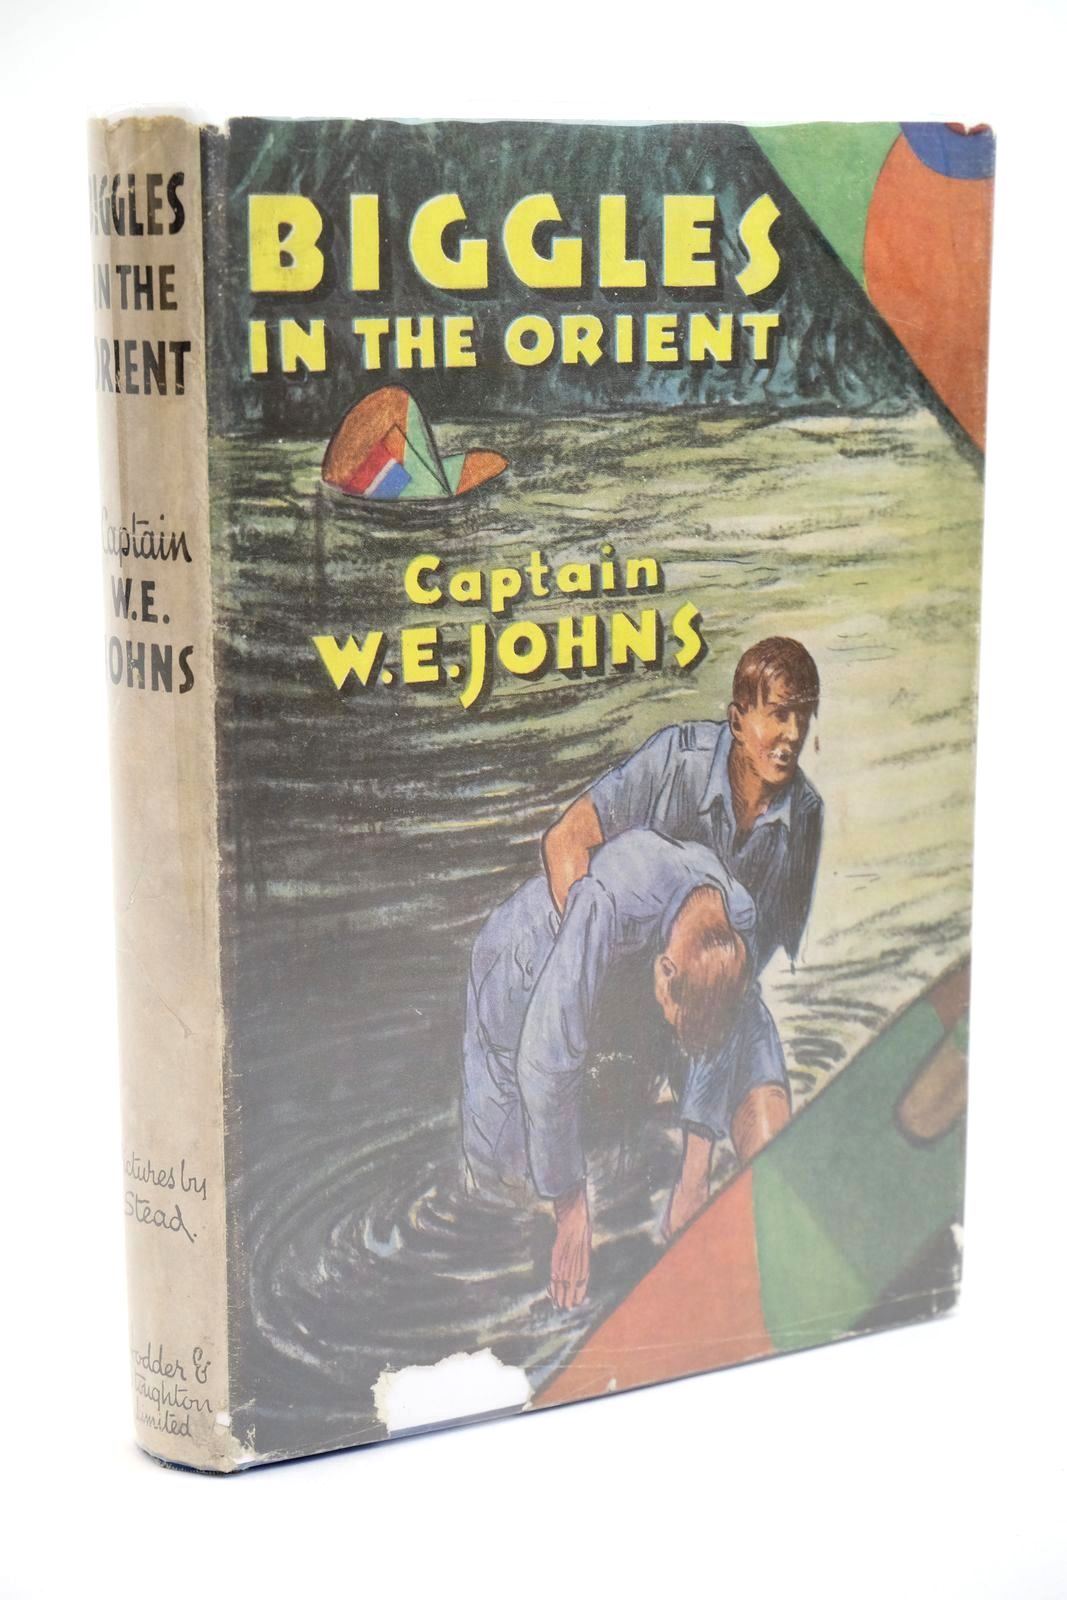 Photo of BIGGLES IN THE ORIENT written by Johns, W.E. illustrated by Stead, published by Hodder &amp; Stoughton (STOCK CODE: 1323247)  for sale by Stella & Rose's Books